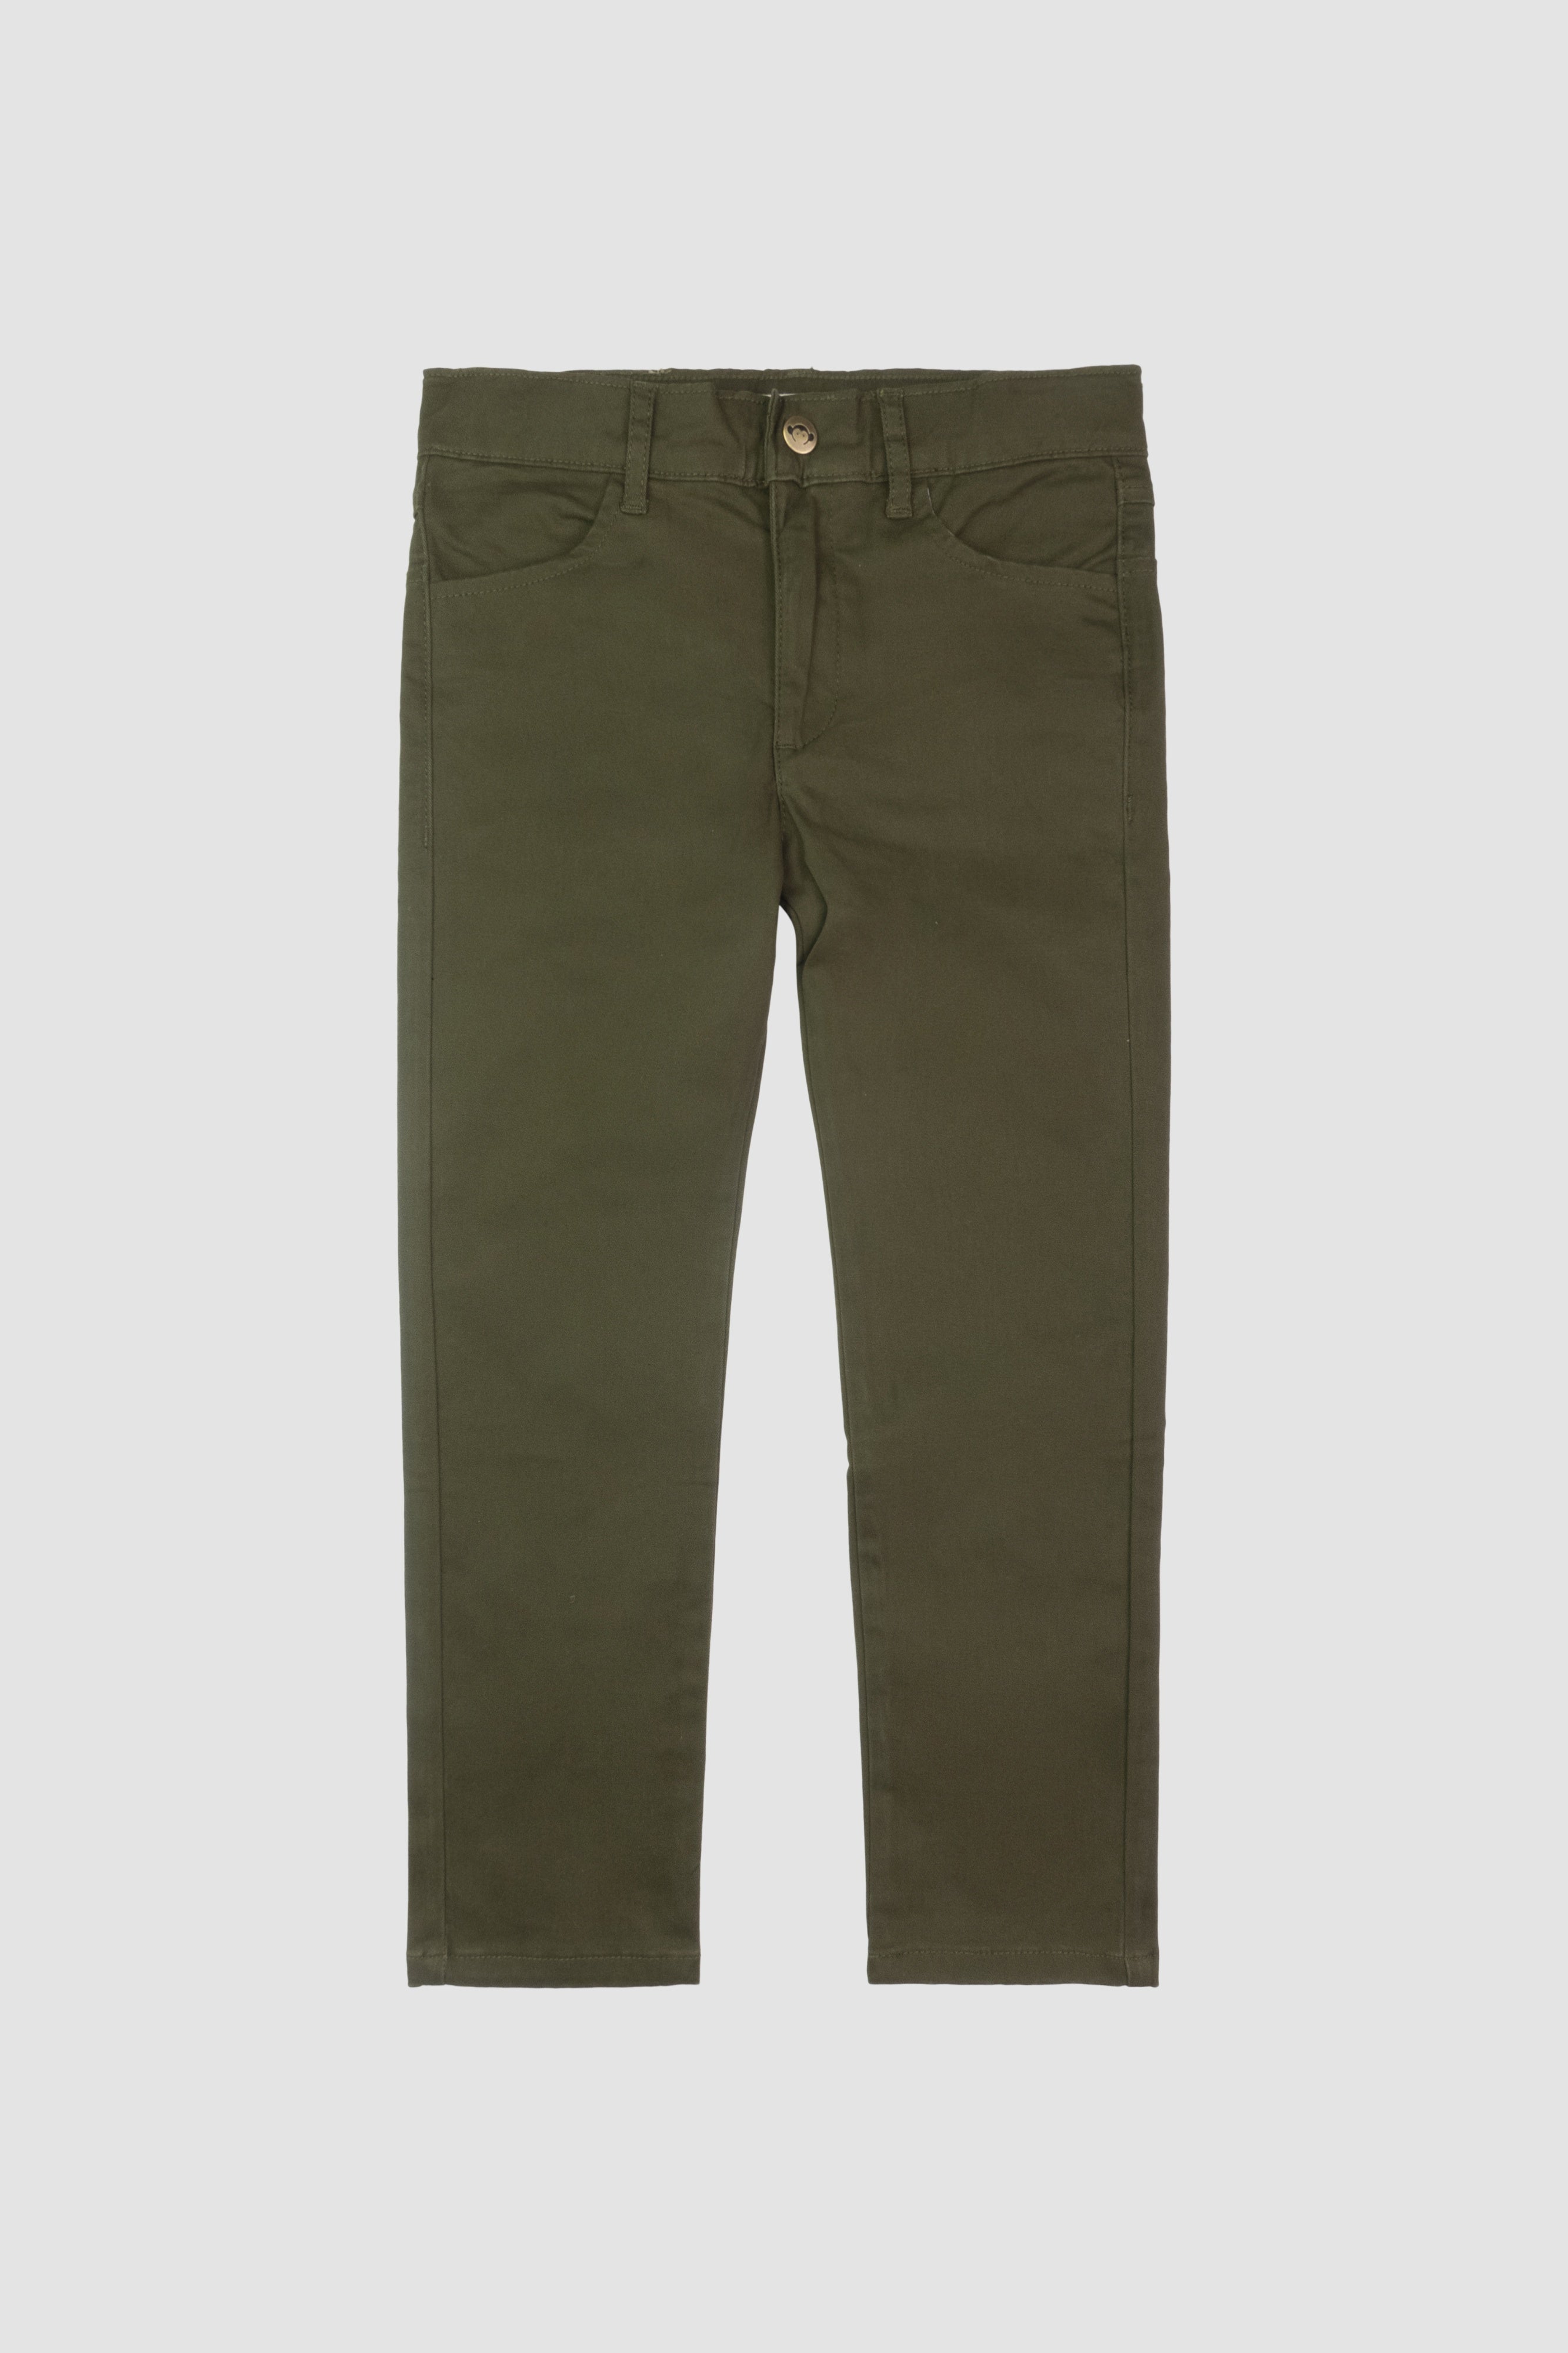 Skinny Twill Pant - Military Olive - Twinkle Twinkle Little One